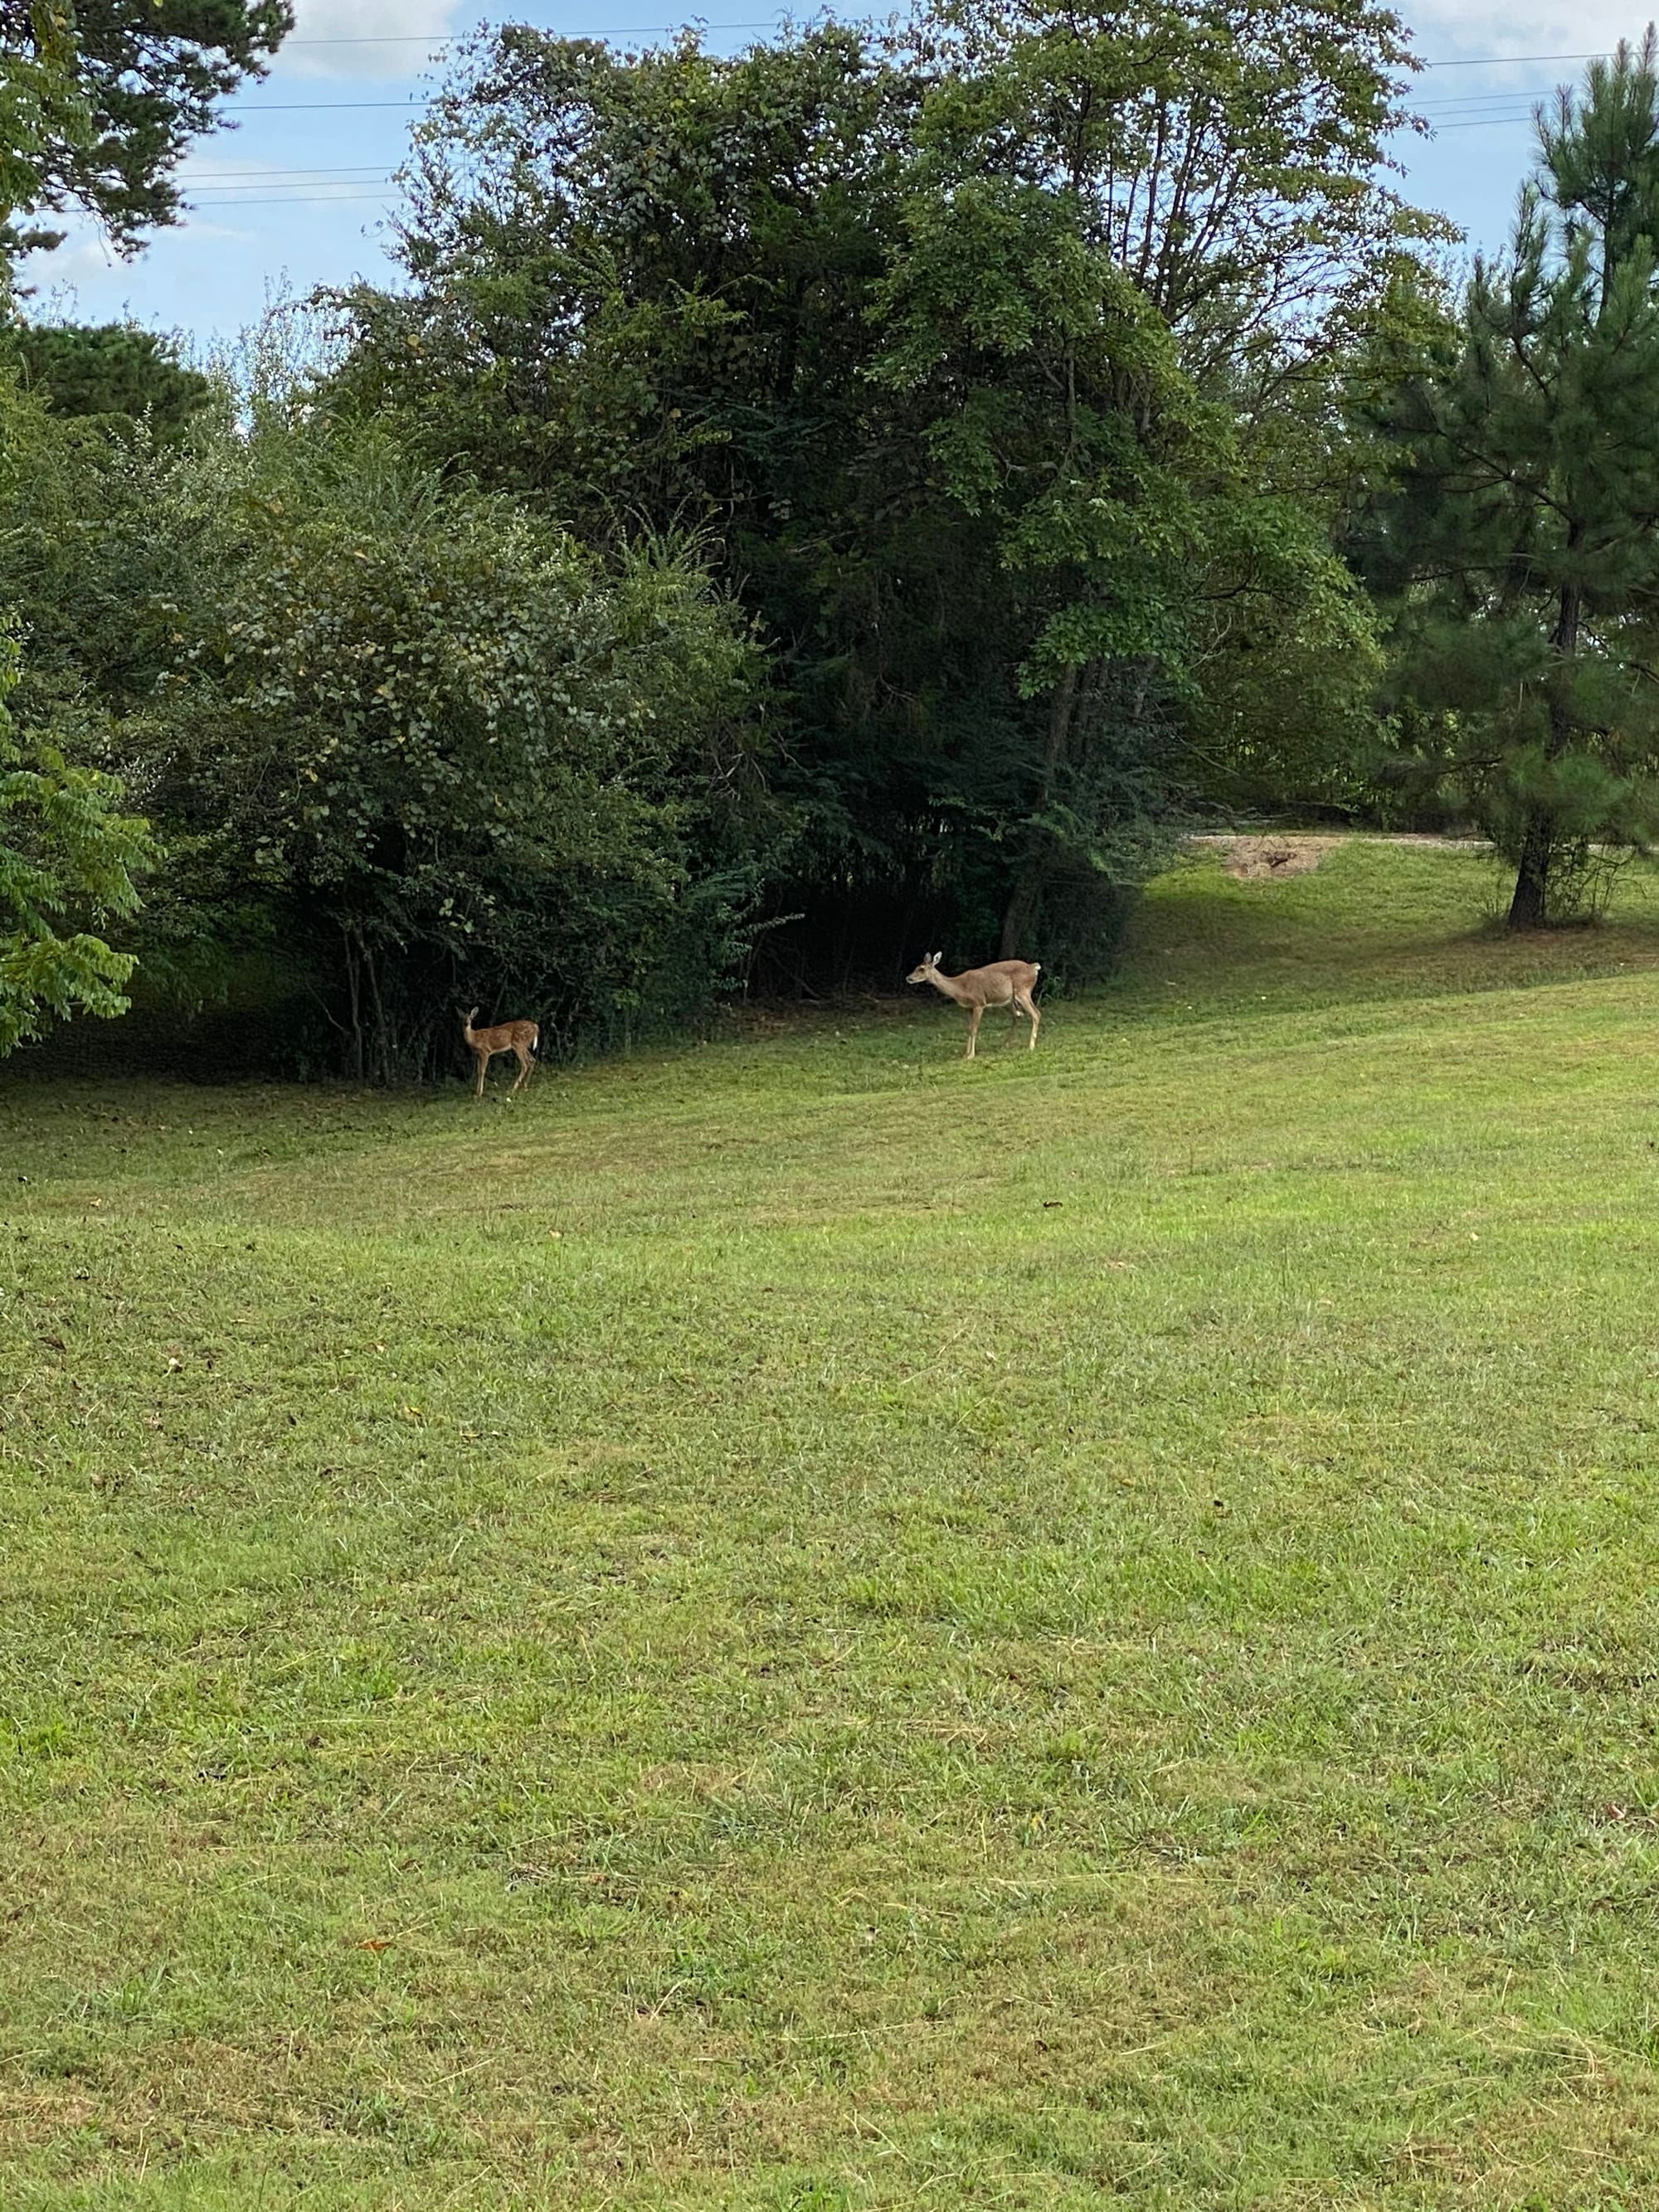 Lots of Deer's on the Property